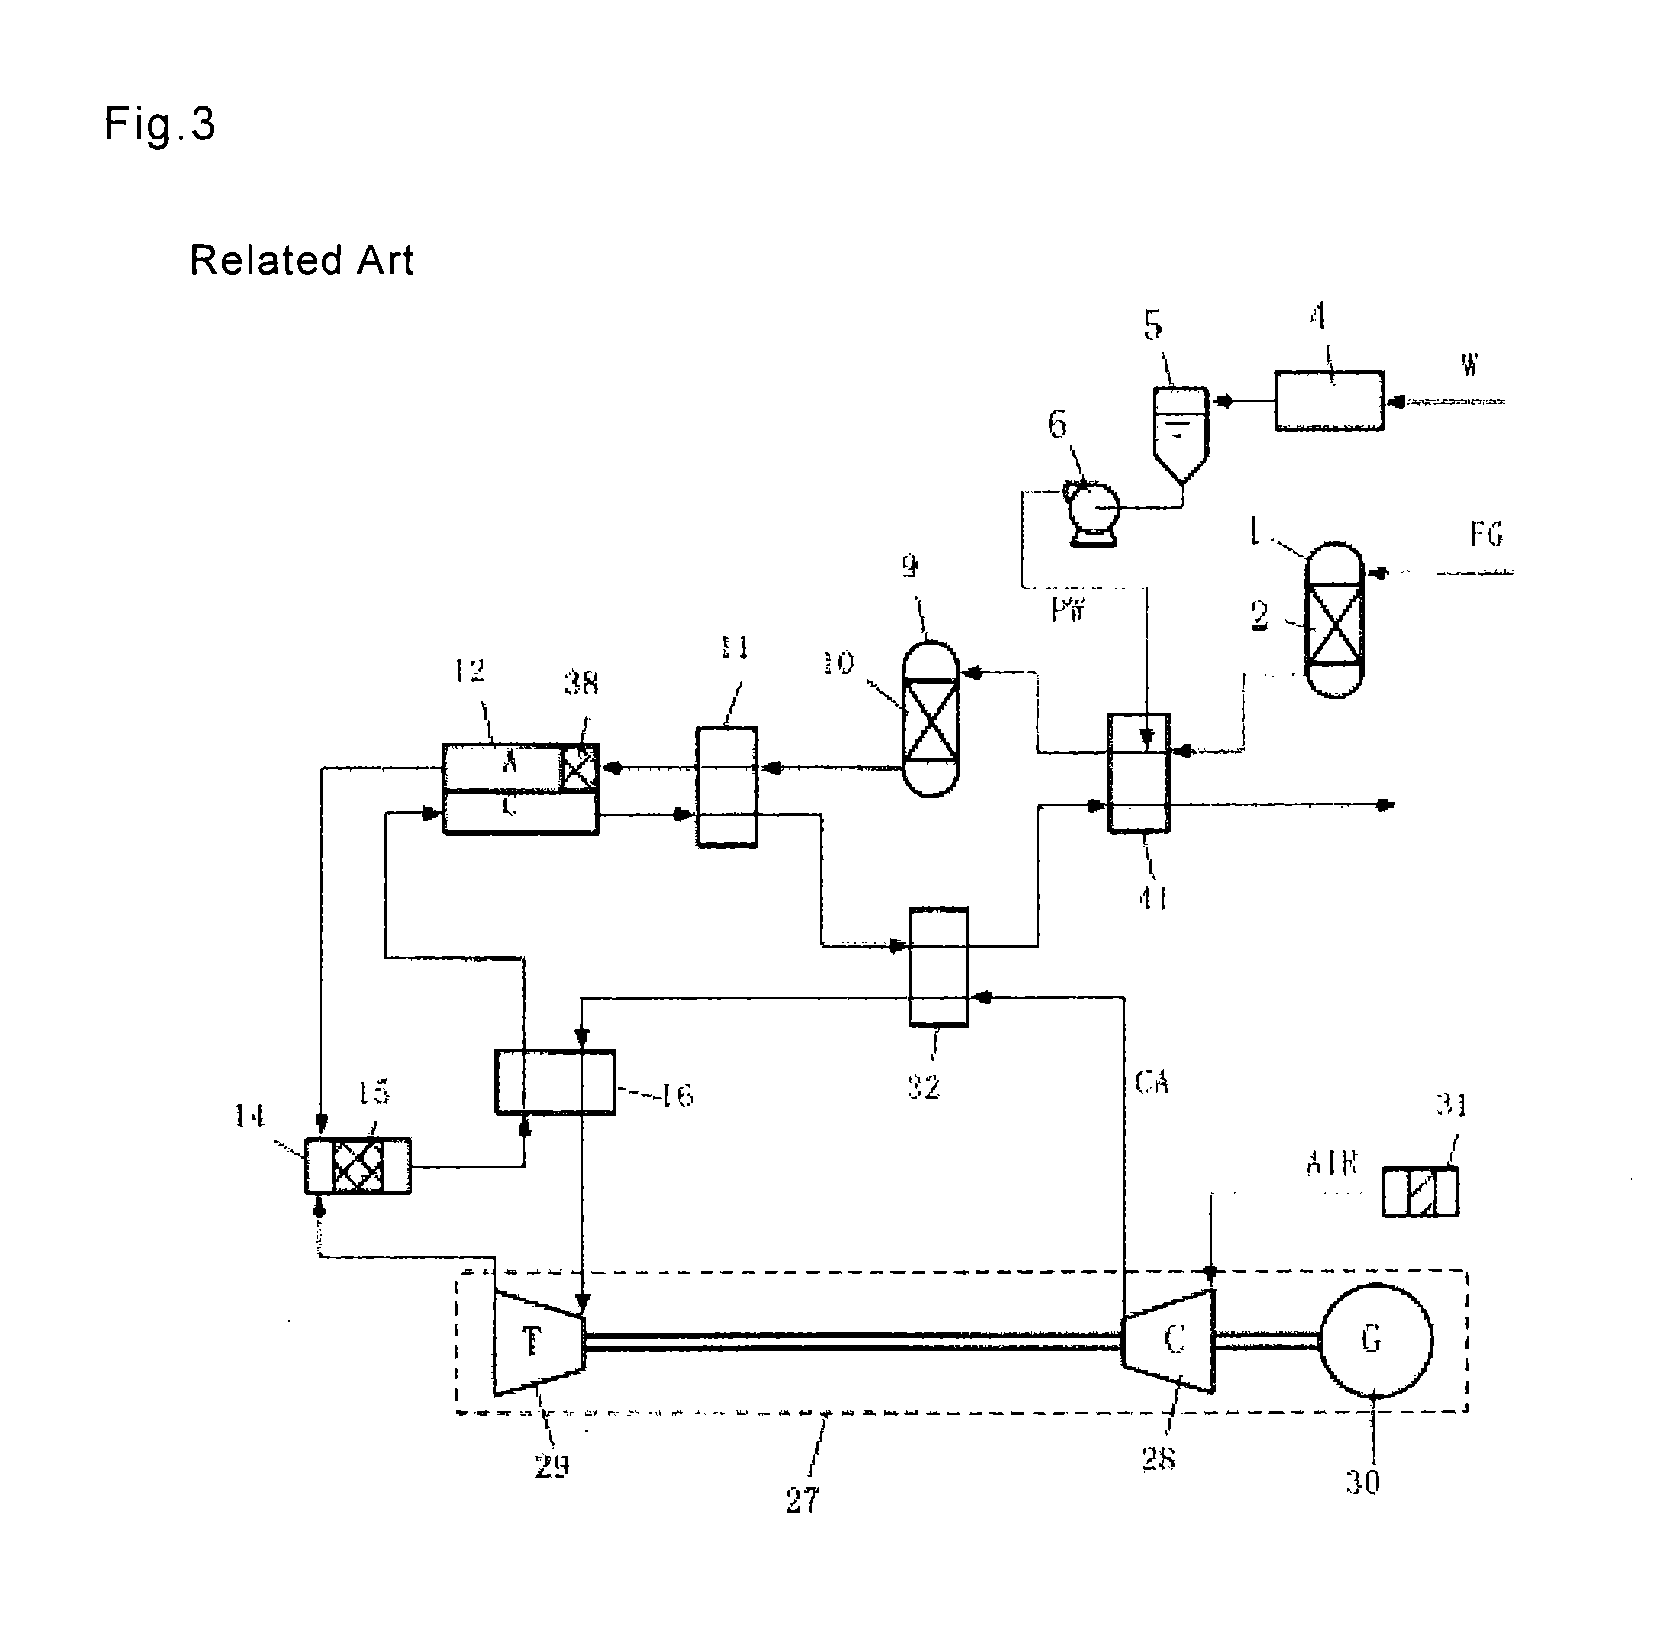 Mcfc power generation system and method for operating same